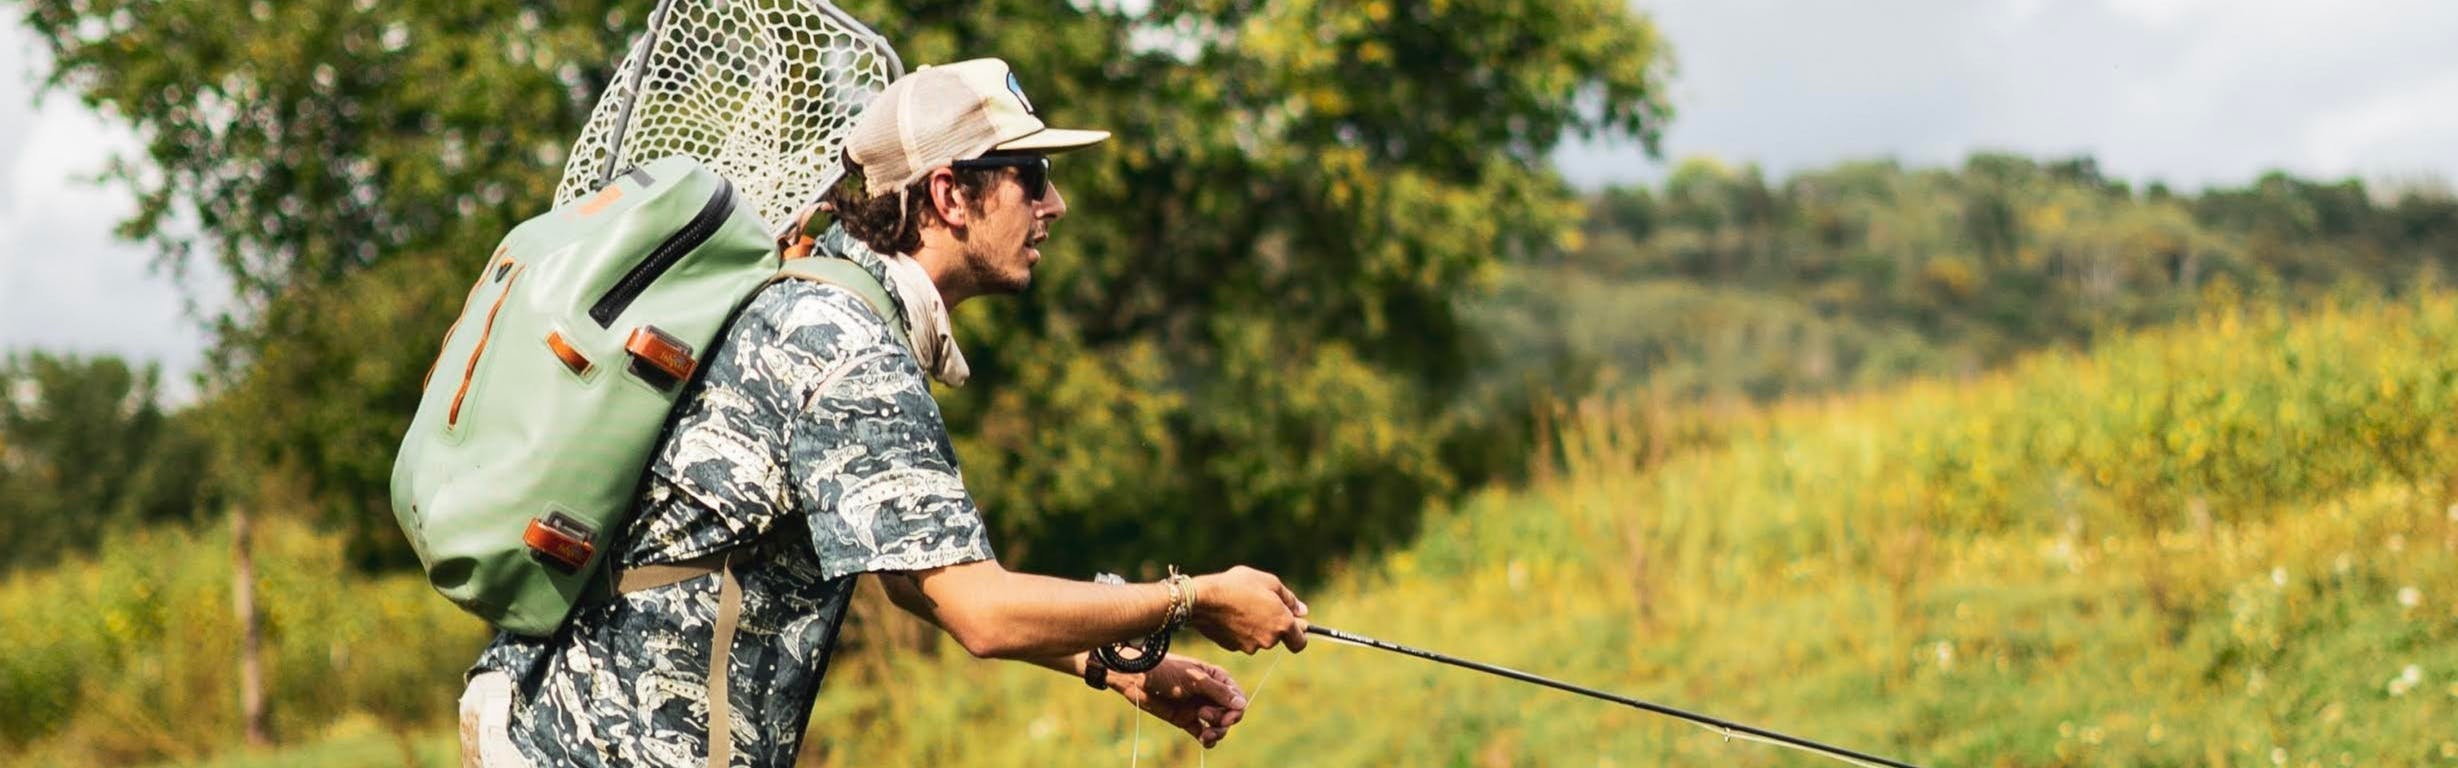 A man fly fishes while wearing a pack. 